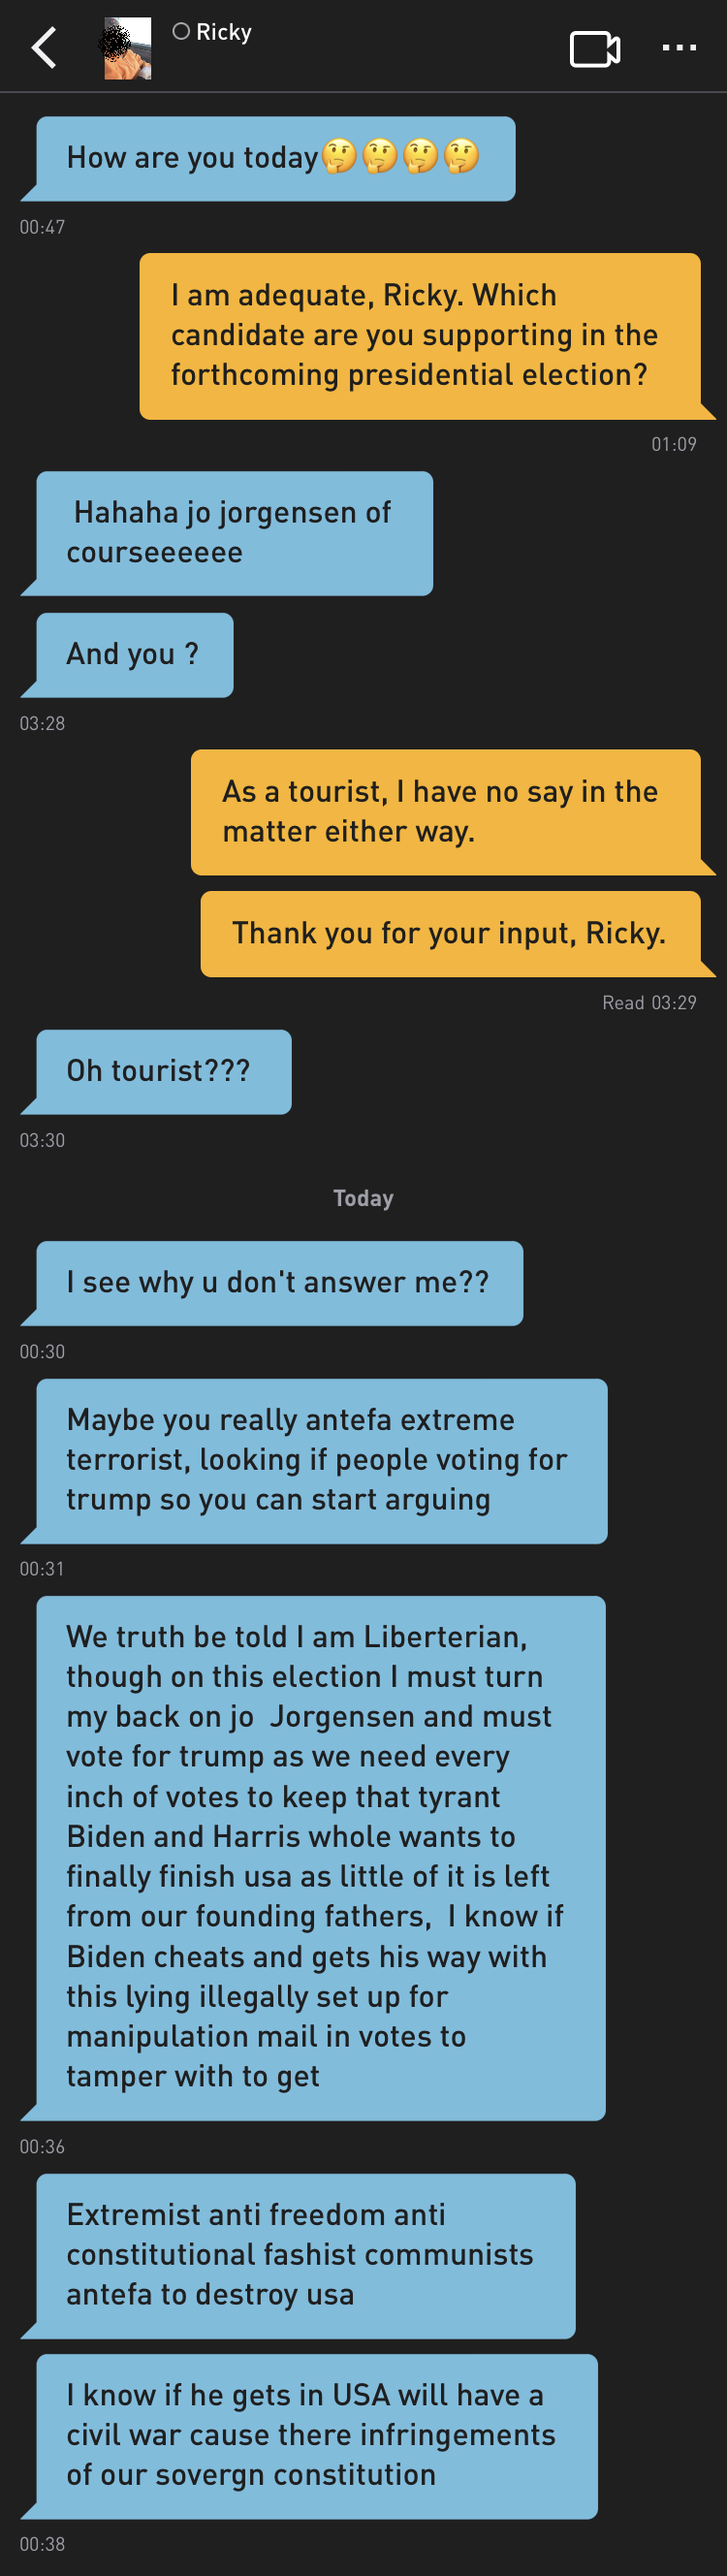 Ricky: How are you today????
Me: I am adequate, Ricky. Which candidate are you supporting in the forthcoming presidential election?
Ricky:  Hahaha jo jorgensen of courseeeeee
Ricky: And you ?
Me: As a tourist, I have no say in the matter either way.
Me: Thank you for your input, Ricky.
Ricky: Oh tourist???
Ricky: I see why u don't answer me??
Ricky: Maybe you really antefa extreme terrorist, looking of people voting for trump so you can start arguing
Ricky: We truth be told I am Liberterian, though on this election I must turn my back on jo  Jorgensen and must vote for trump as we need every inch of votes to keep that tyrant Biden and Harris whole wants to finally finish usa as little of it is left from our founding fathers, I know if Biden cheats and gets his way with this lying illegally set up for manipulation mail in votes to tamper with to get
Ricky: Extremist anti freedom anti constitutional fashist communists antefa to destroy usa
Ricky: I know if he gets in USA will have a civil war cause there infringements of our soveregn constitution